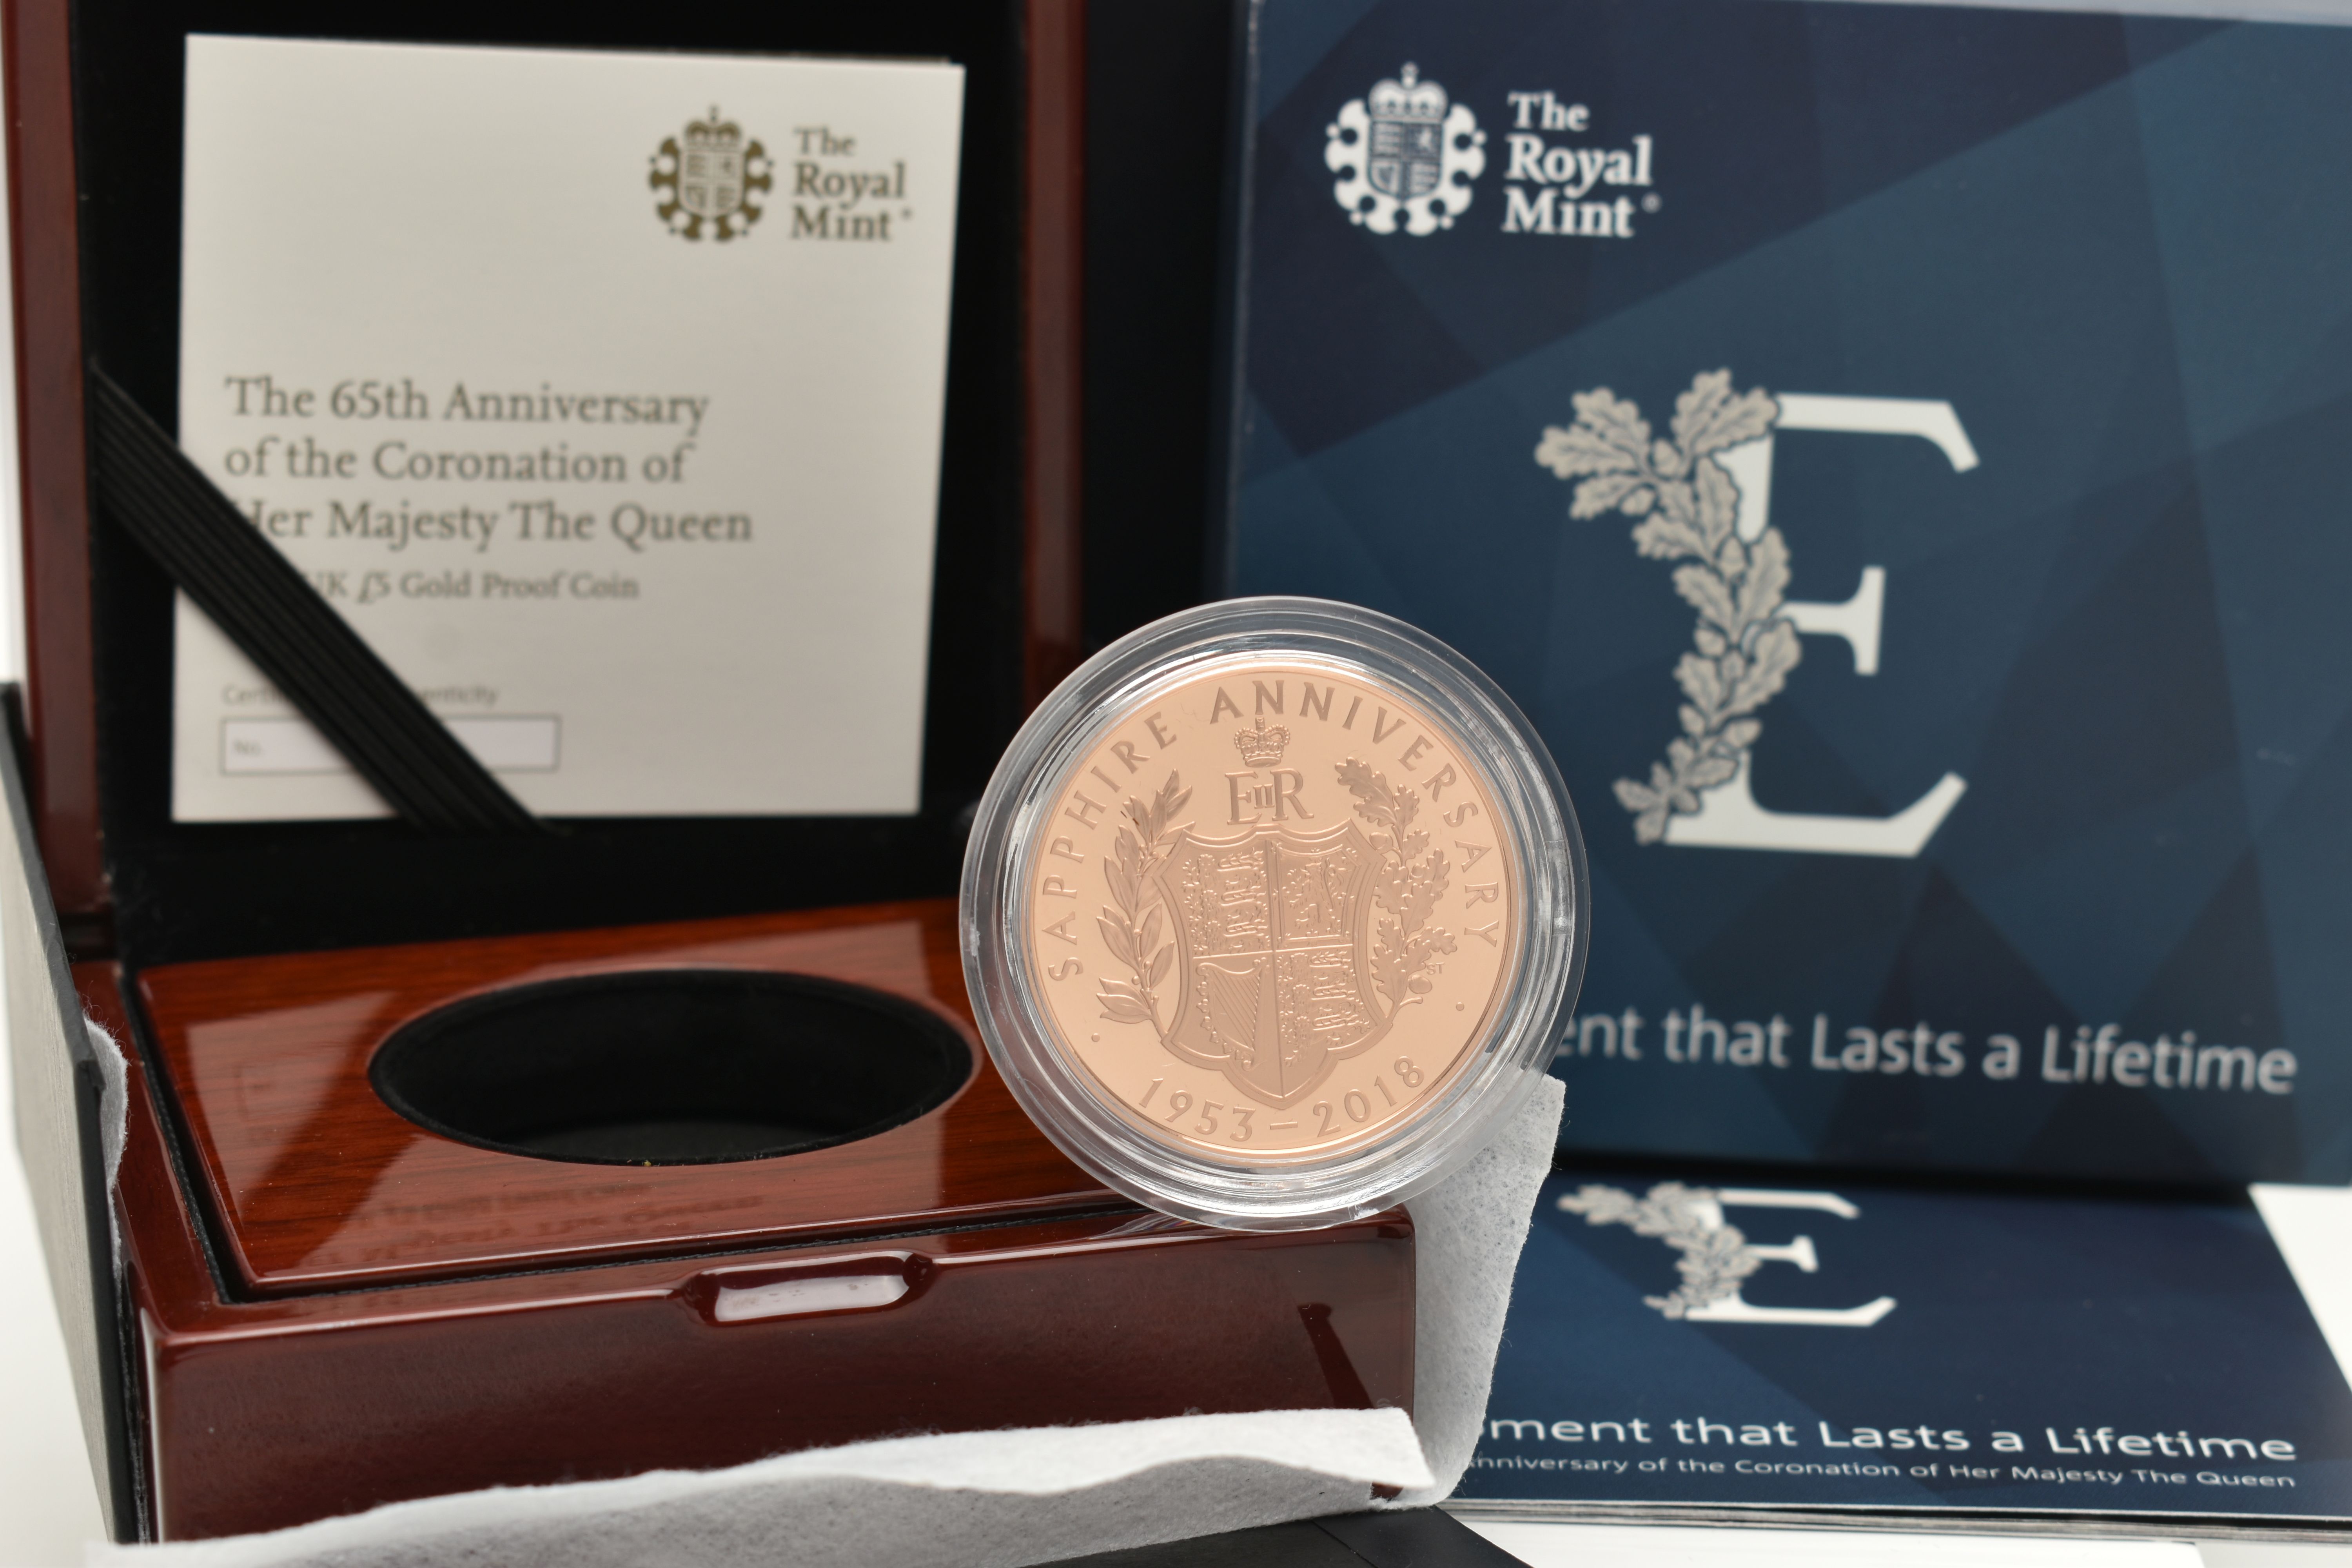 A BOXED ROYAL MINT 'THE 65TH ANNIVERSARY OF THE CORONATION OF HER MAJESTY THE QUEEN 2018 UK GOLD